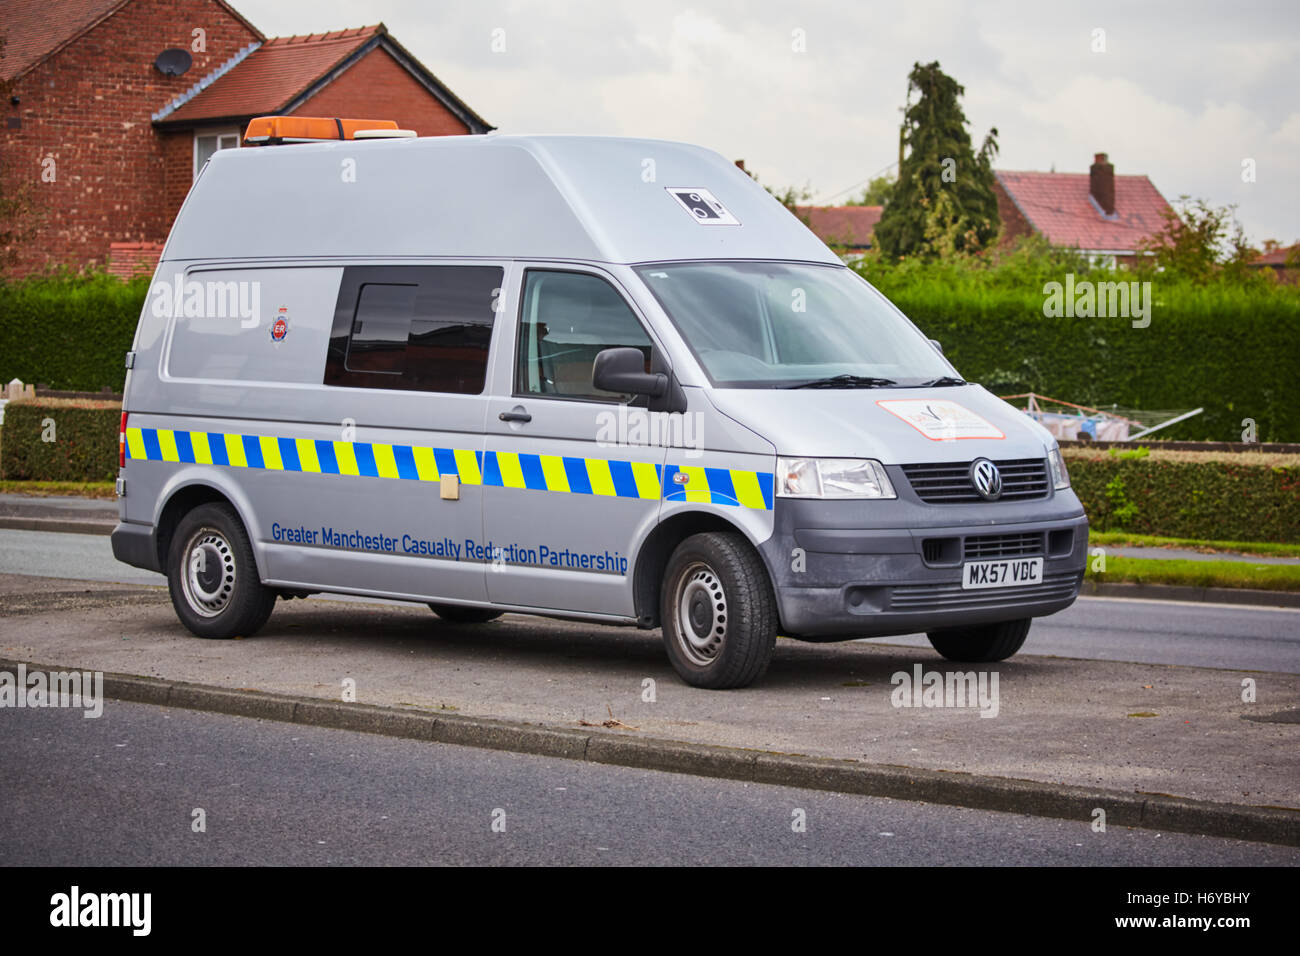 mobile enforcement vehicle speed trap A57 Hyde road  speed enforcement Greater Manchester Casualty Reduction Partnership van rad Stock Photo